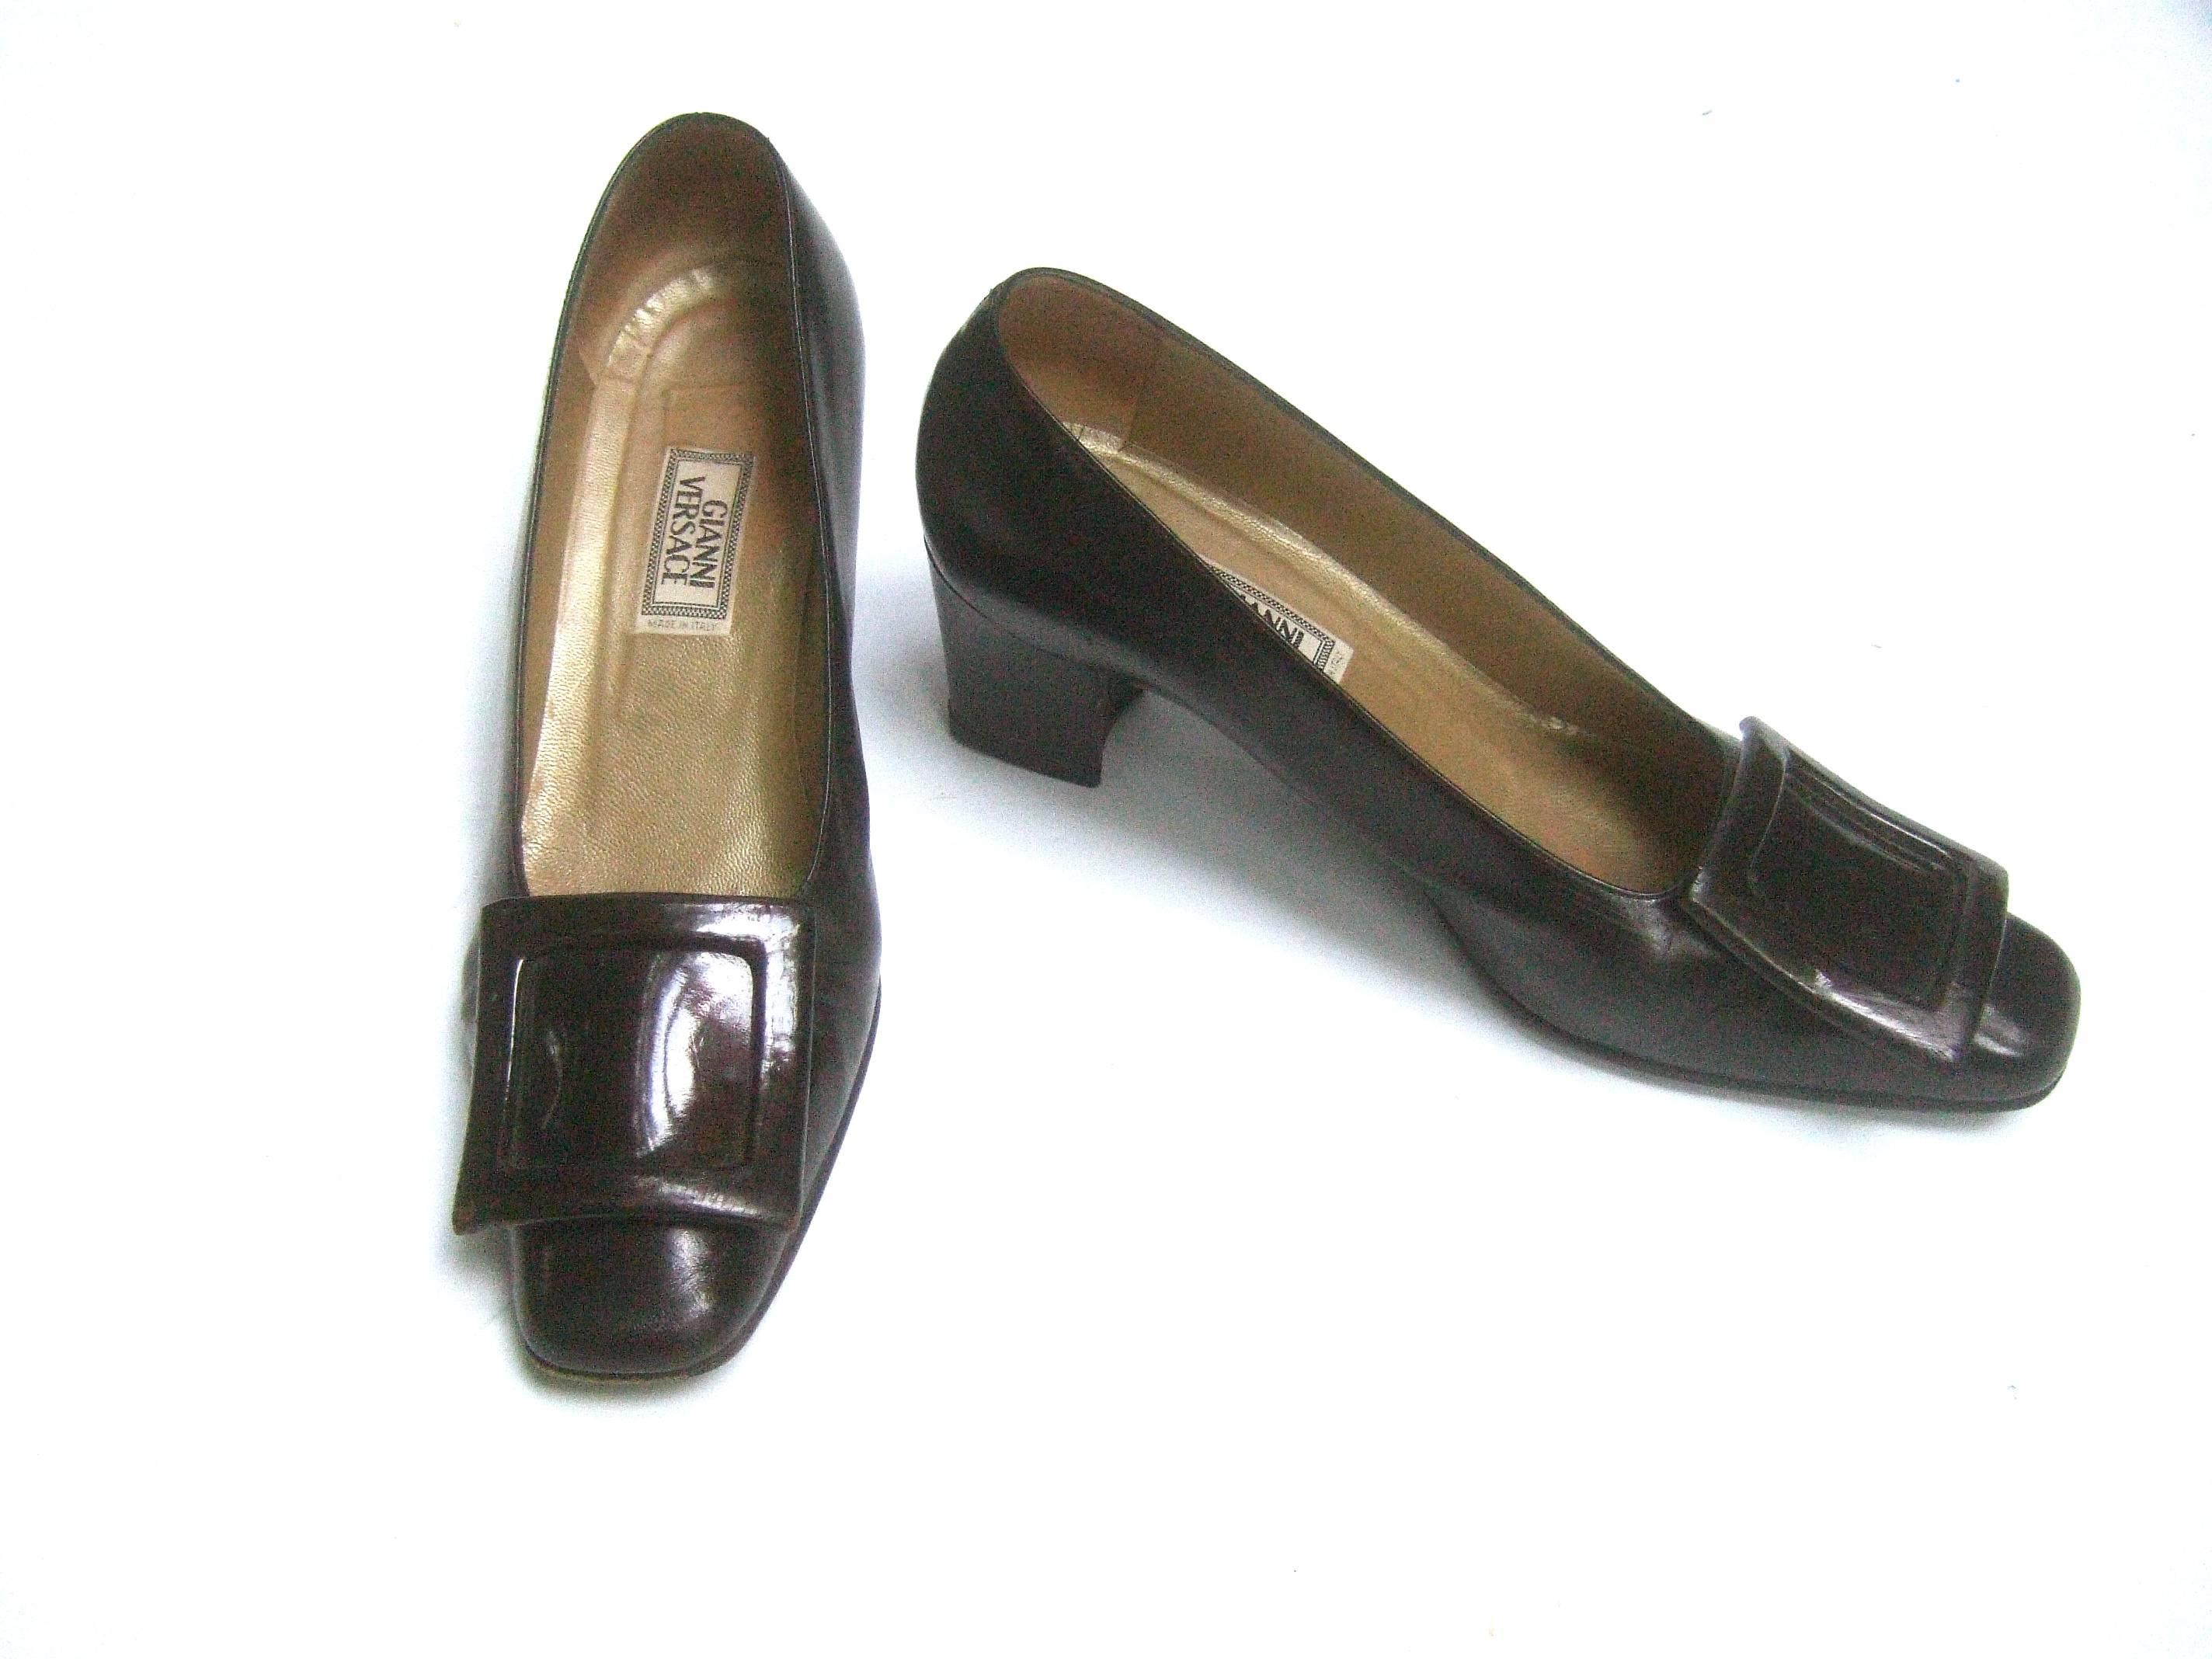 Gray Versace Chocolate Brown Leather Pumps in Versace Box Size 39 c 1990 For Sale